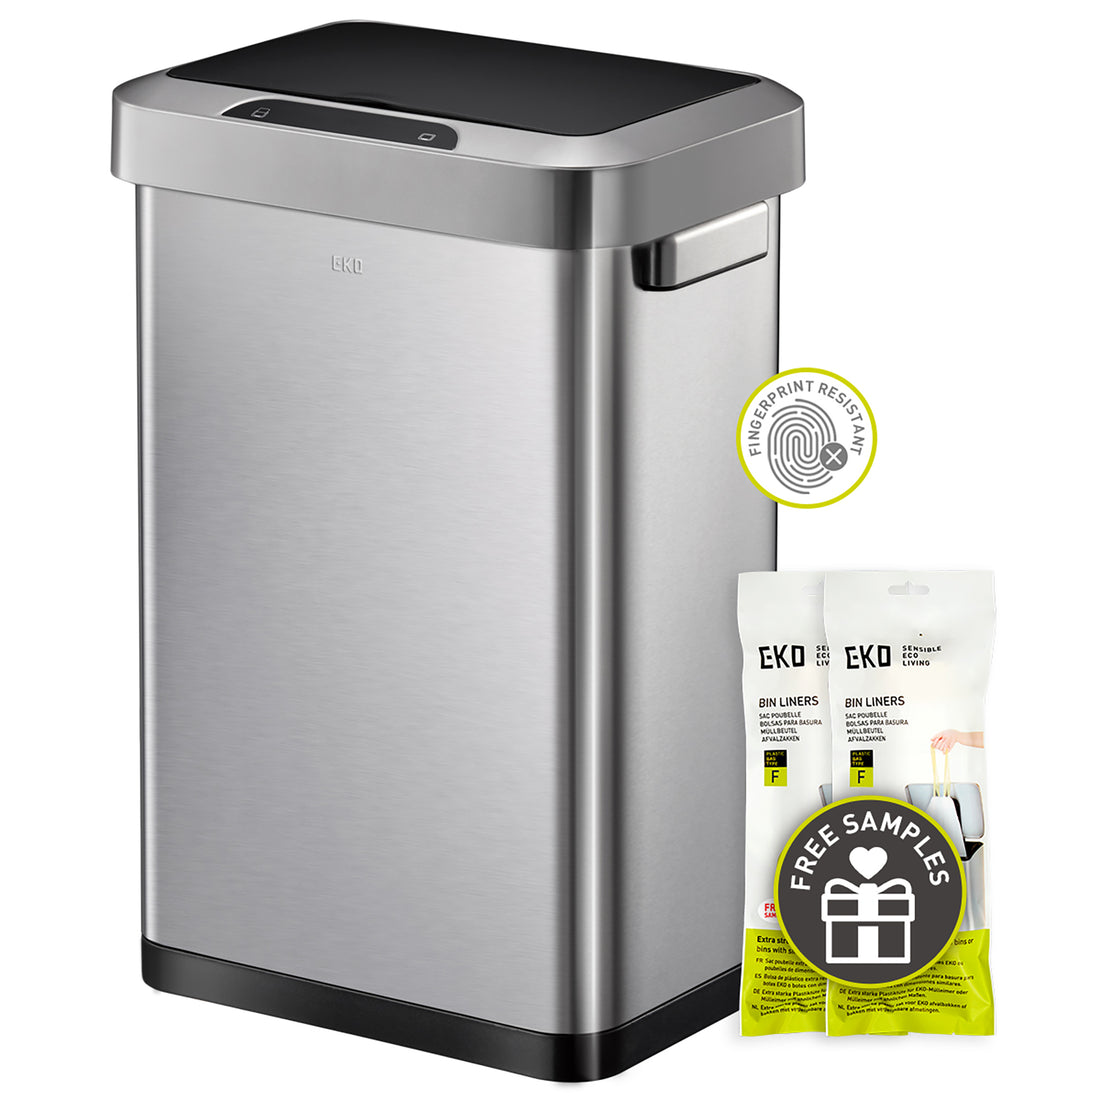 EKO Horizon bin is the perfect choice if you have limited space but require  maximum waste storage. 